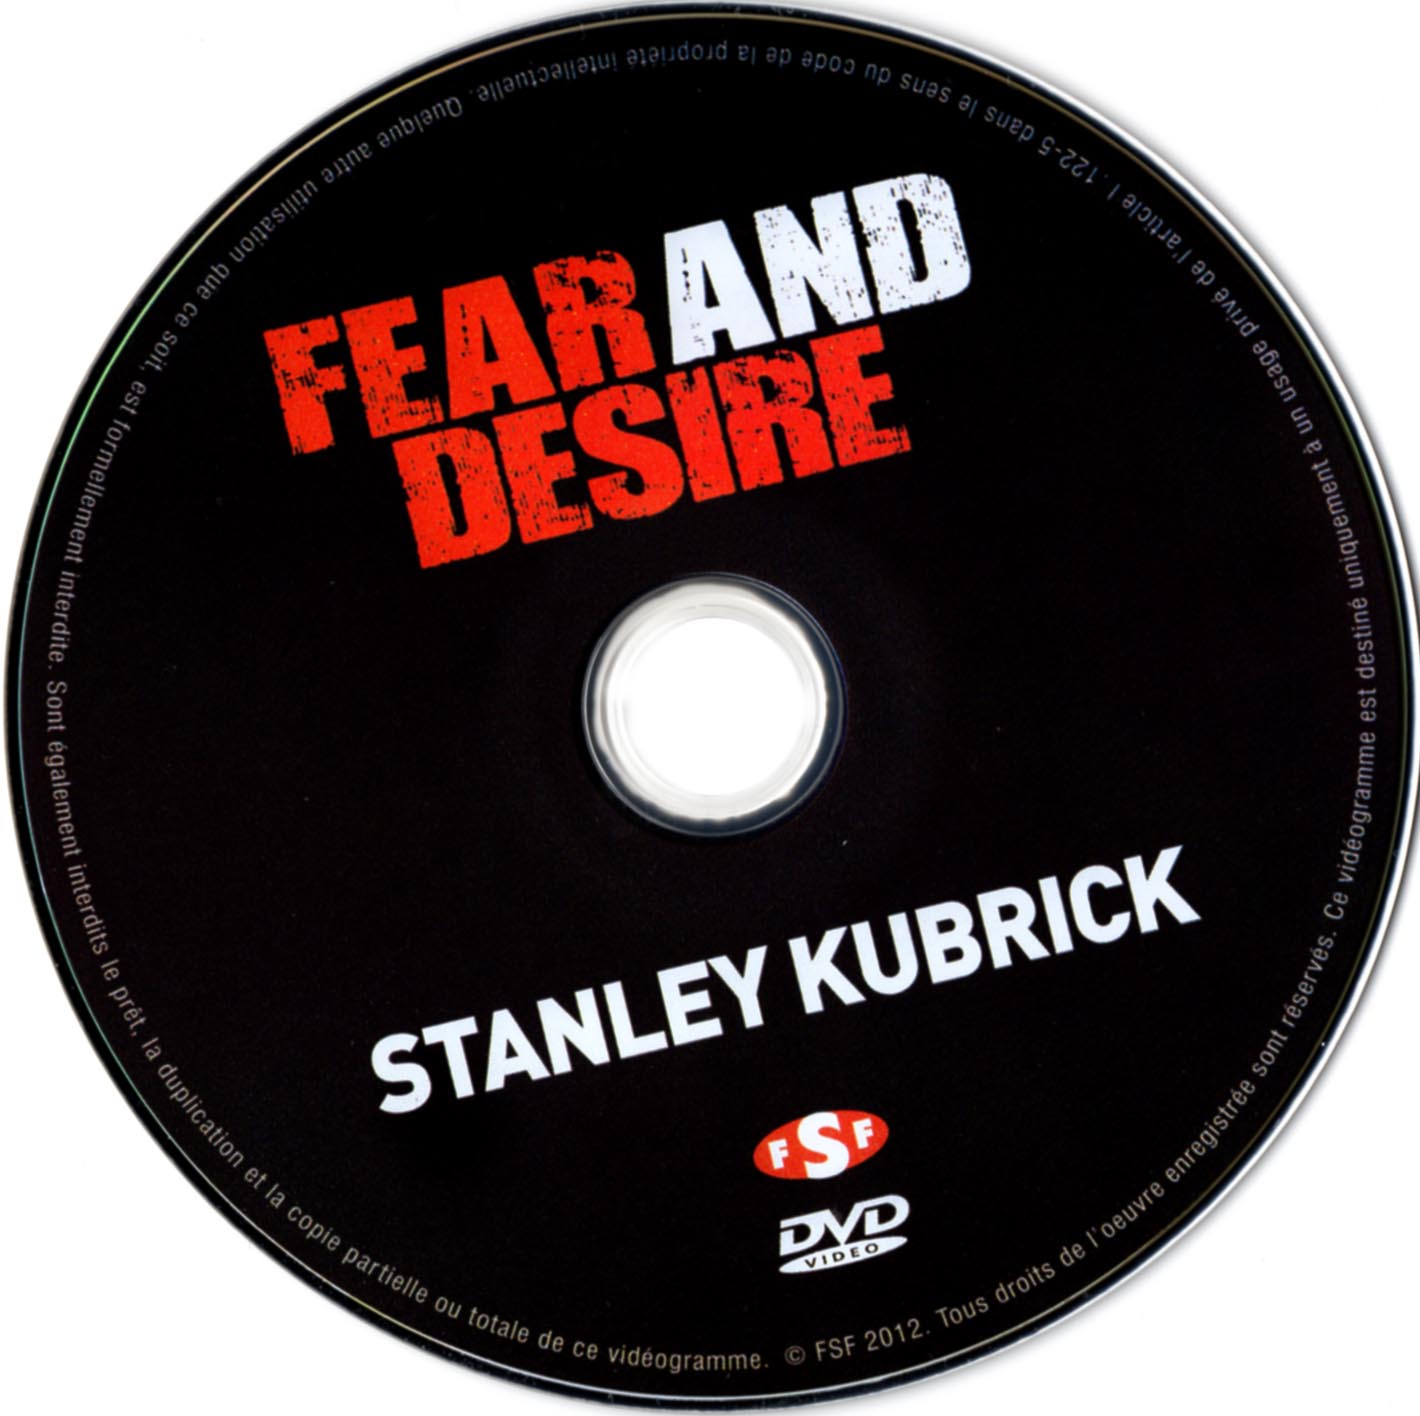 Fear and desire